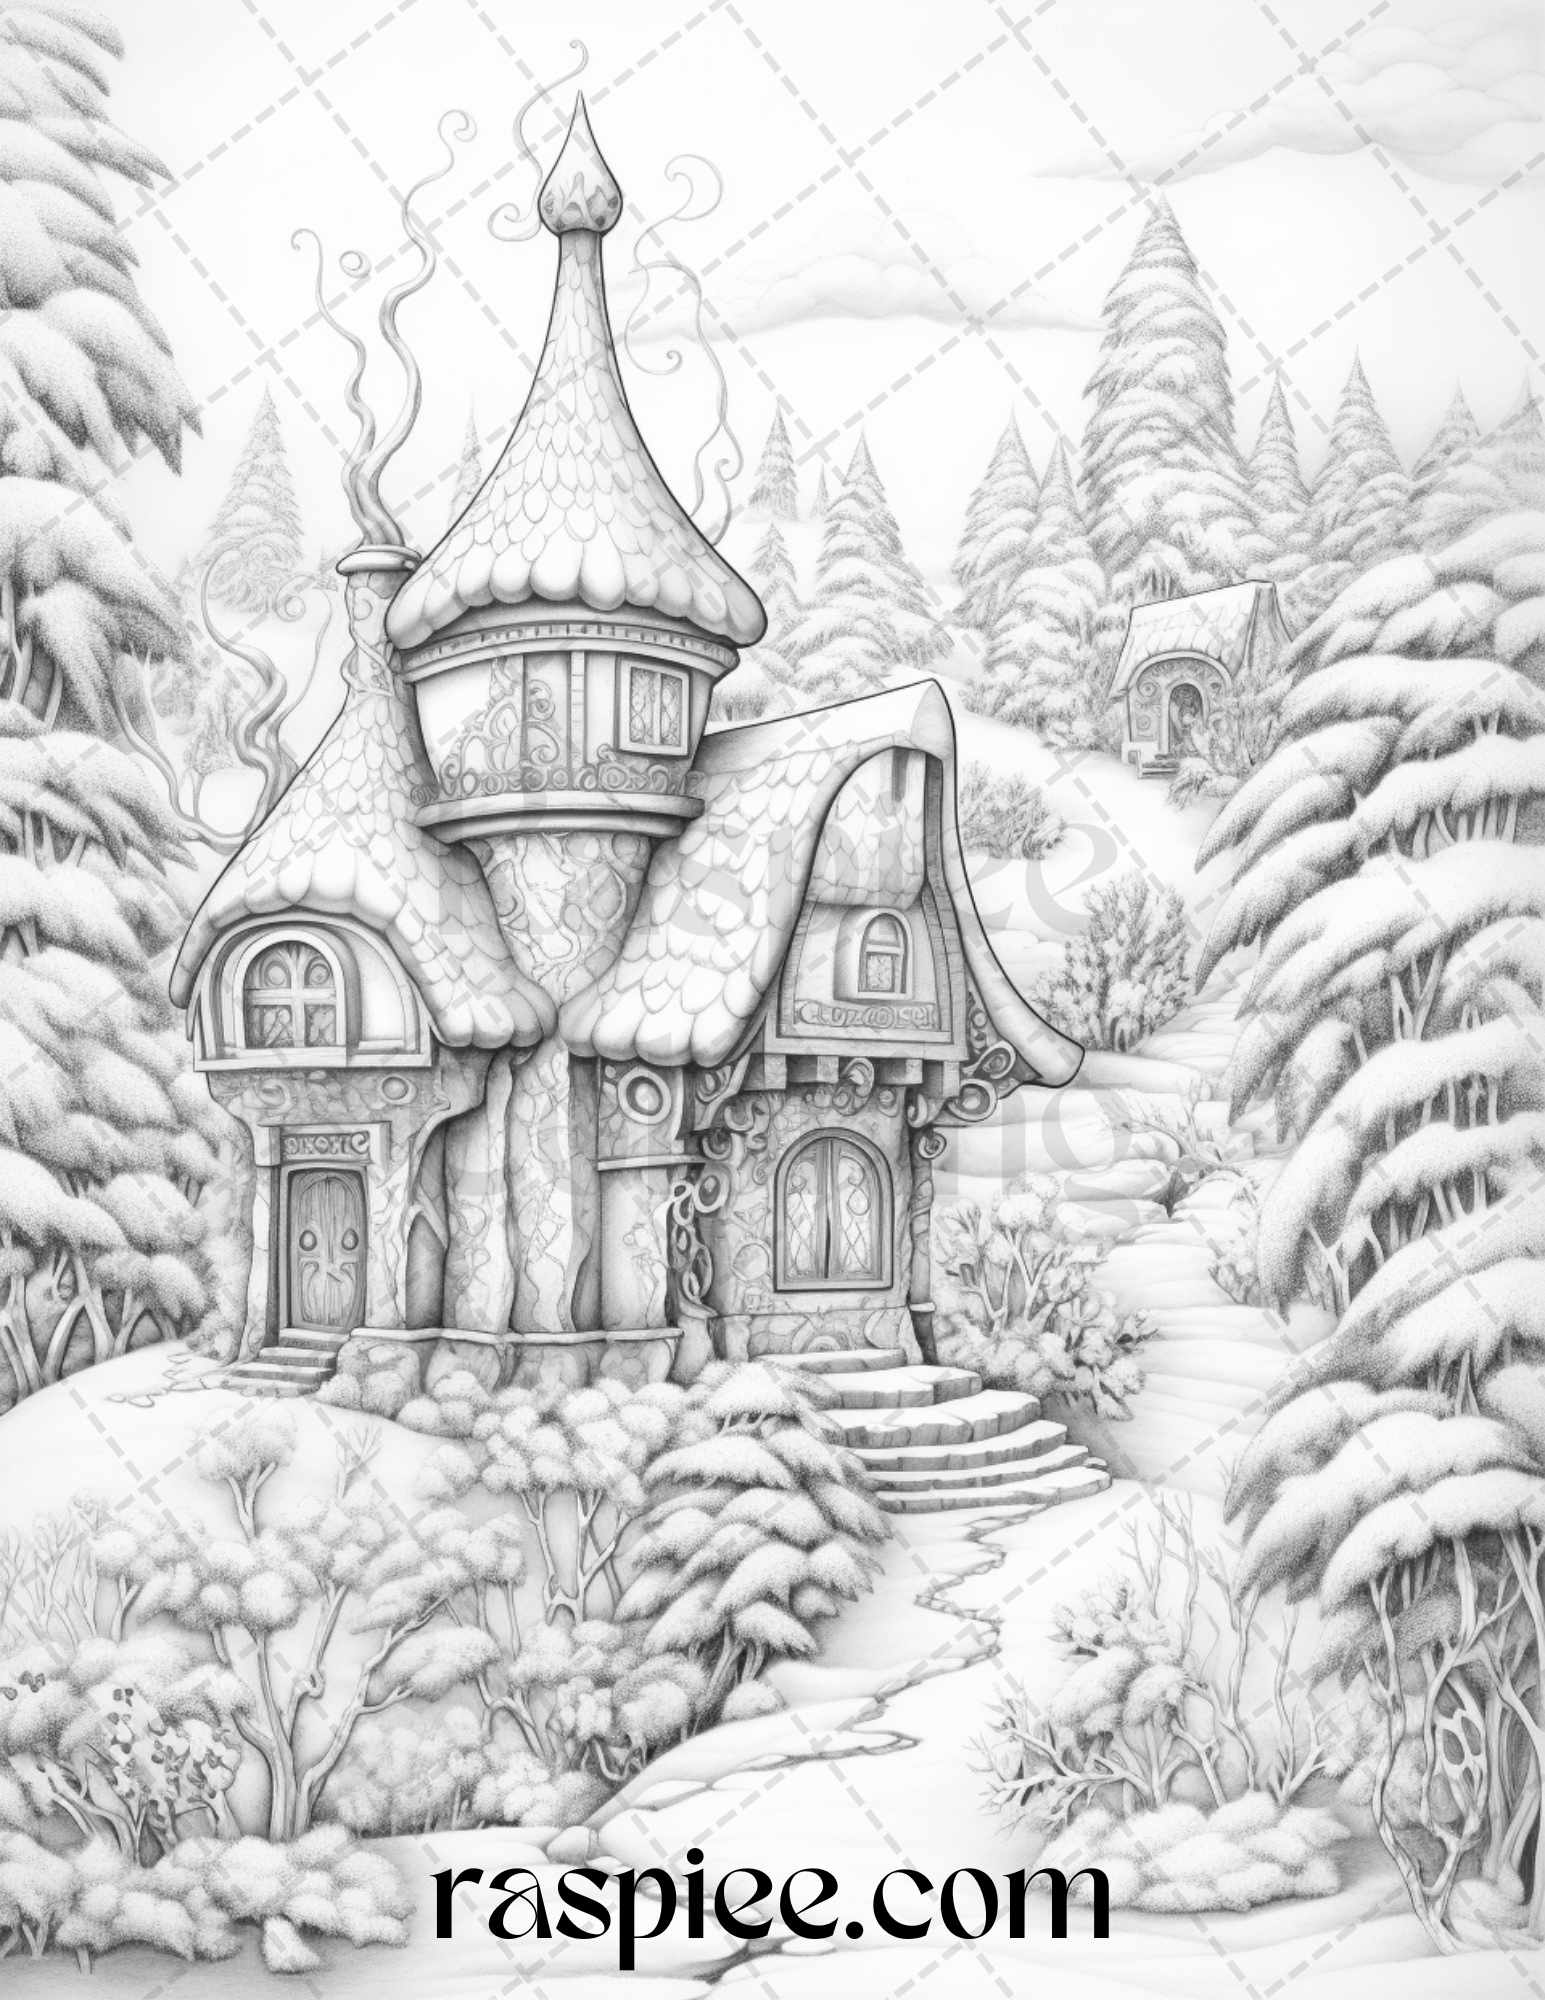 Fantasy Christmas House Coloring Page, Adult Coloring Book Illustration, Festive Holiday Coloring Sheet, Seasonal Coloring Activity, Relaxing Coloring for Adults, Holiday Coloring Fun, Christmas Coloring Craft, Winter Coloring Pages, Xmas Coloring Pages for Adults